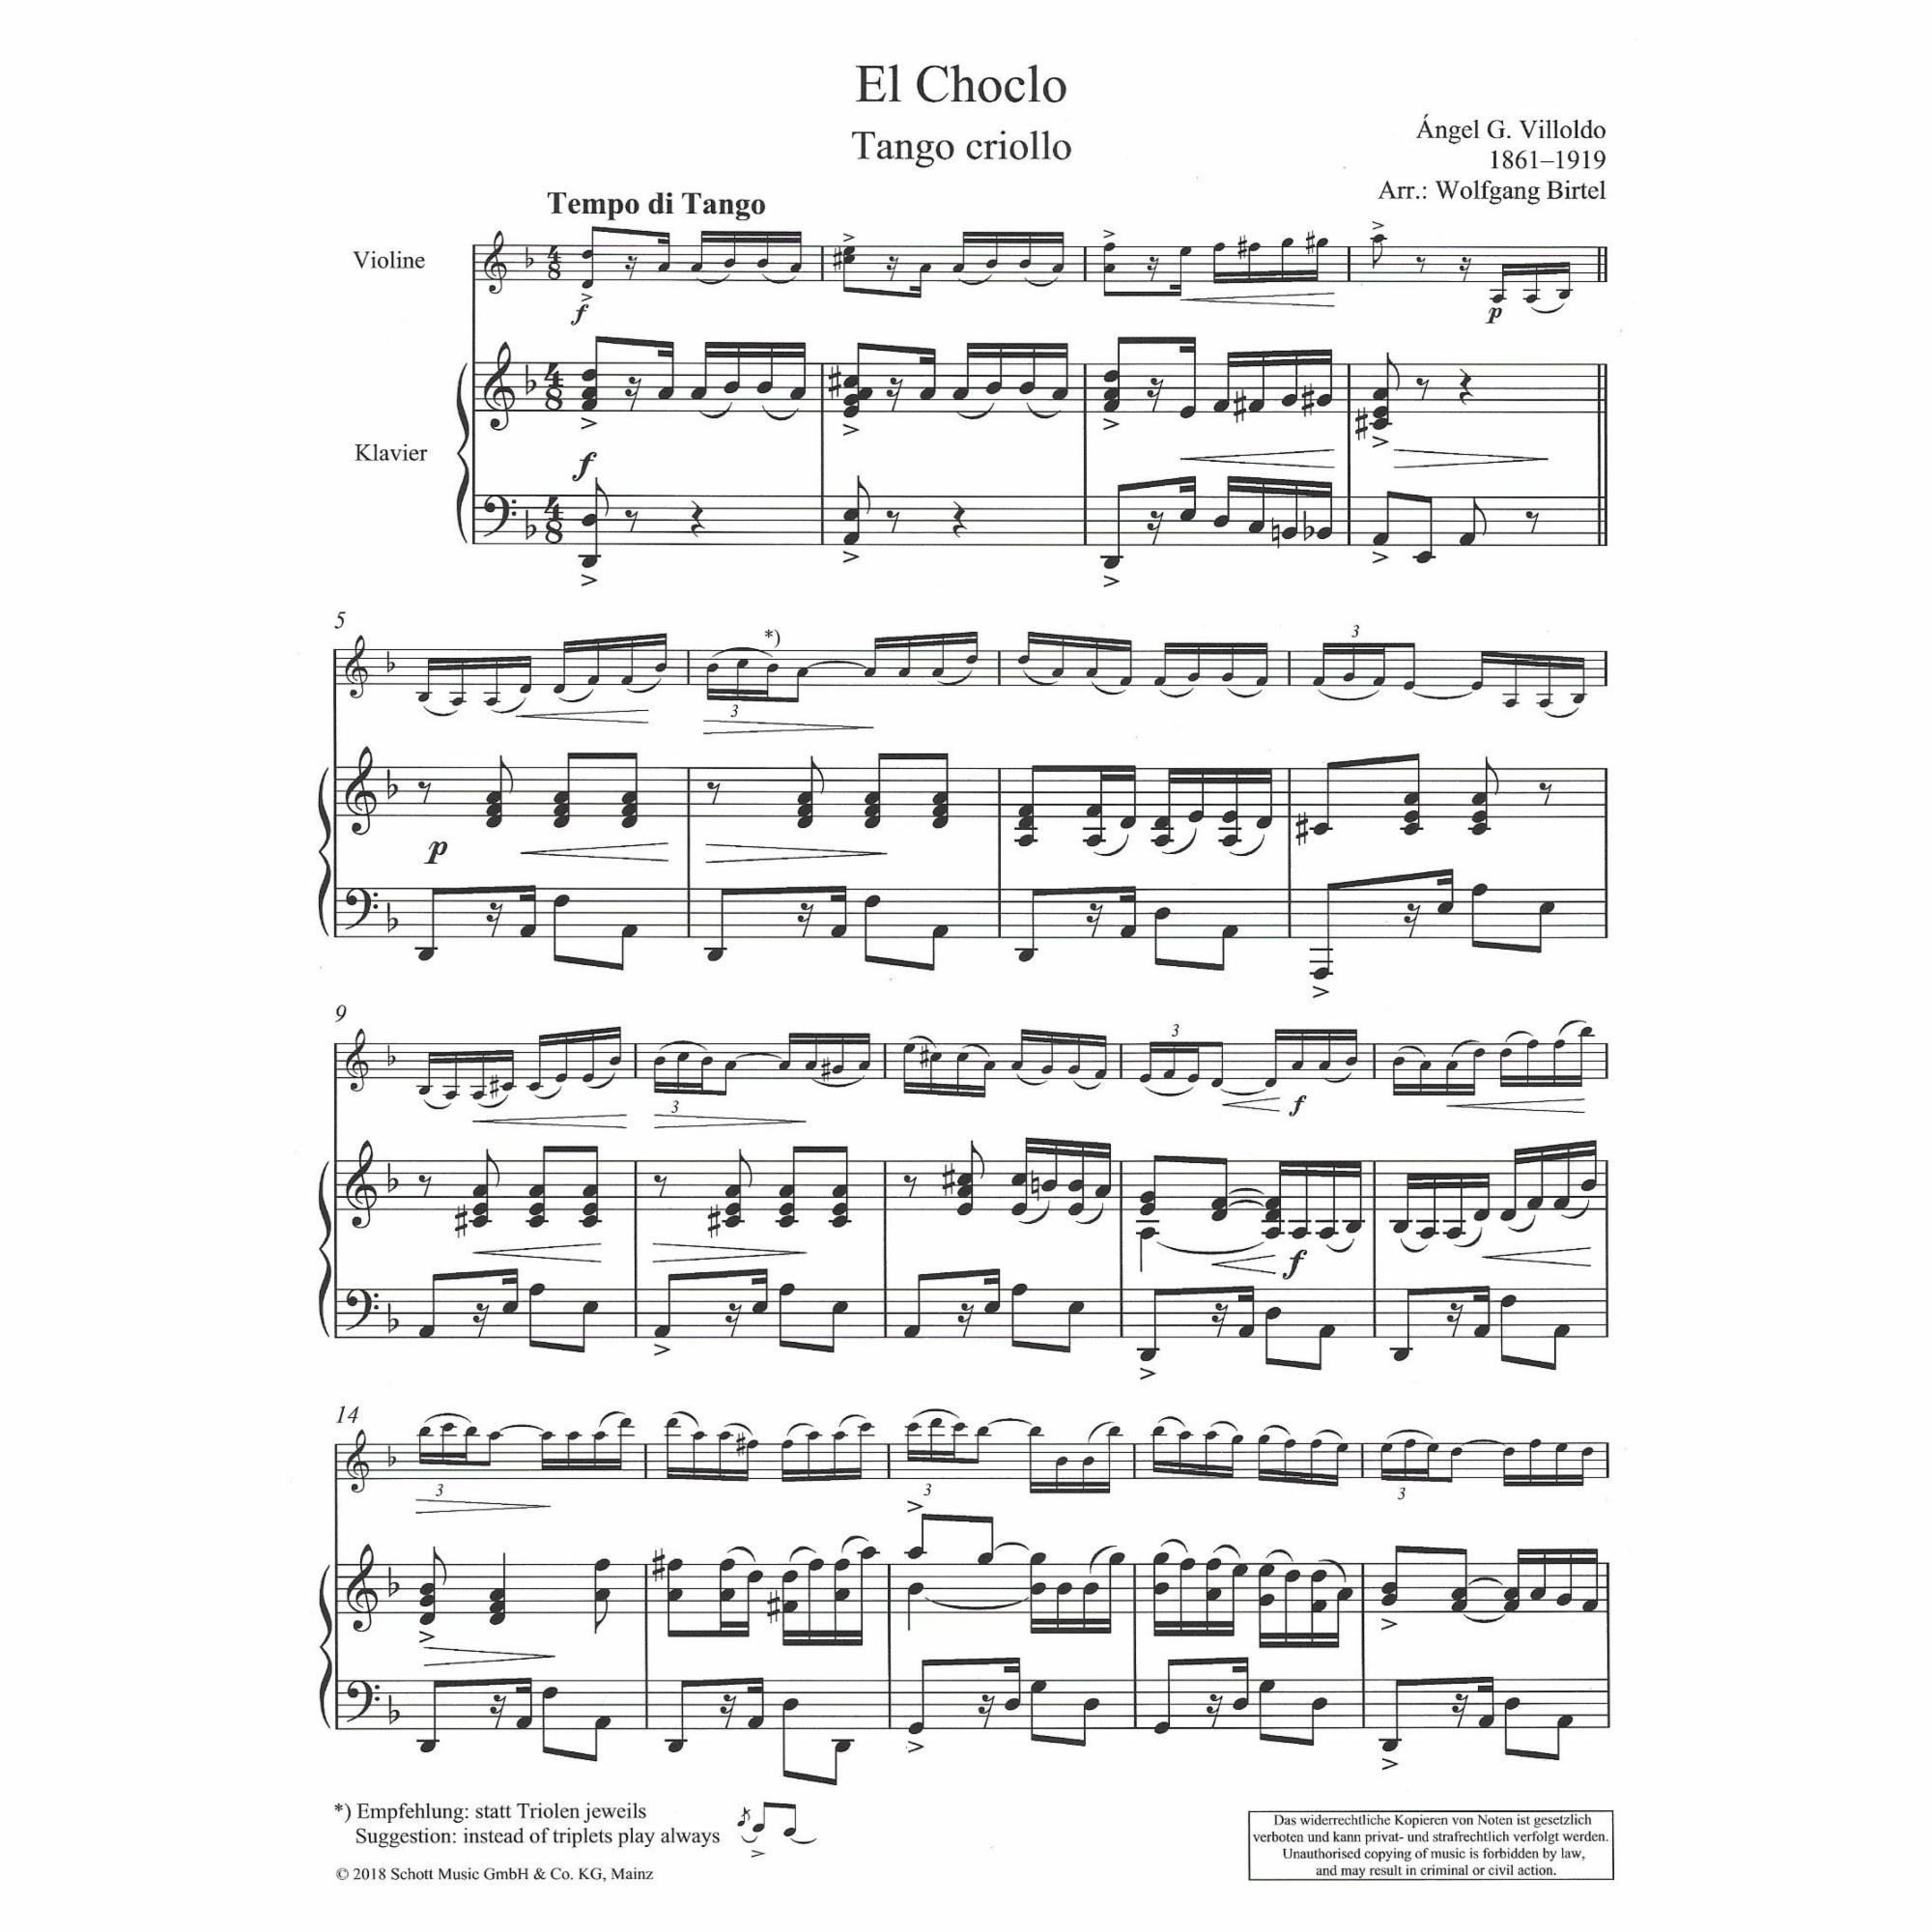 El Choclo for Violin and Piano | Southwest Strings